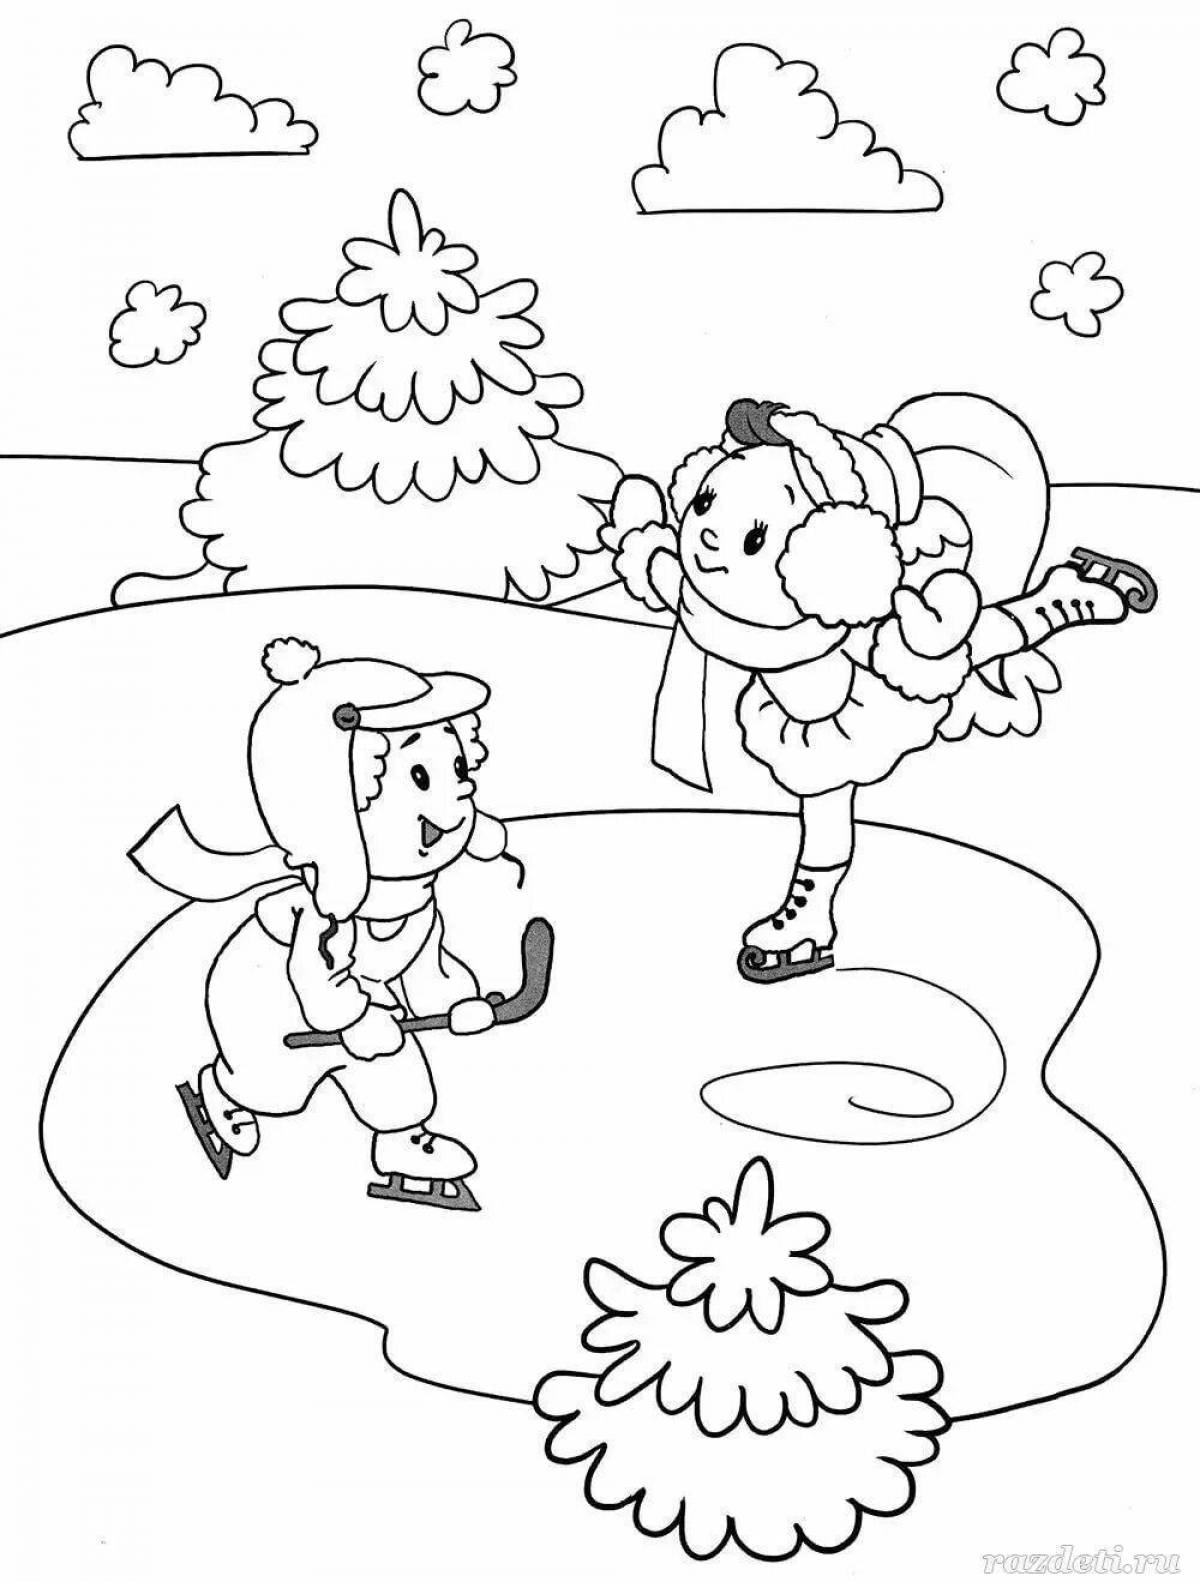 Coloring page of a magnificent ice rink